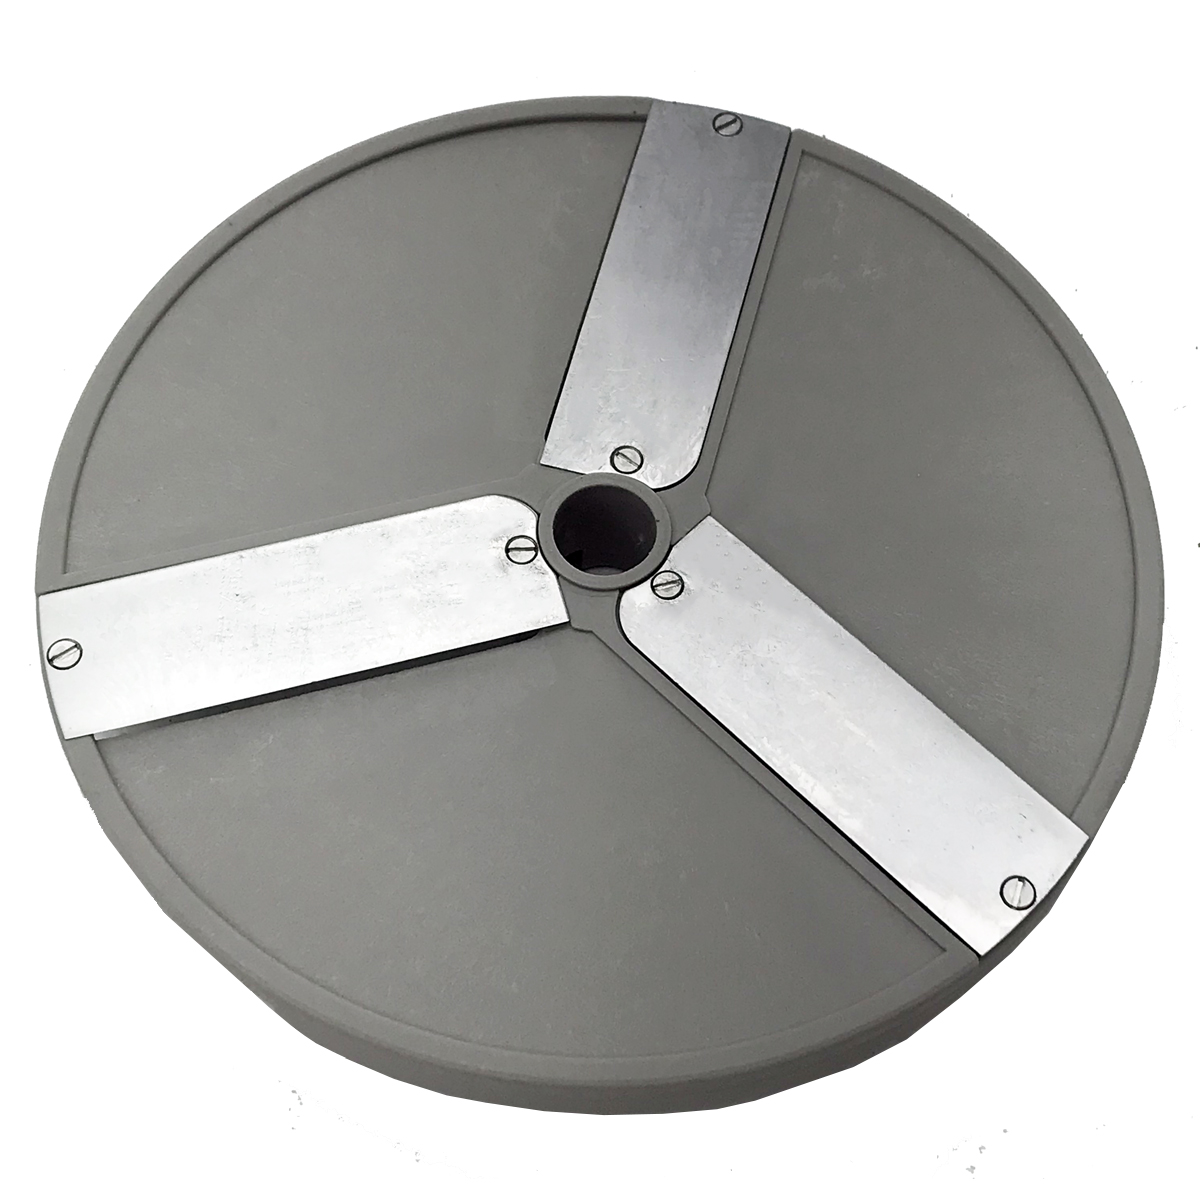 Cater-Prep CKP92227 2mm Slicing Disc for Cater-Prep CK75647